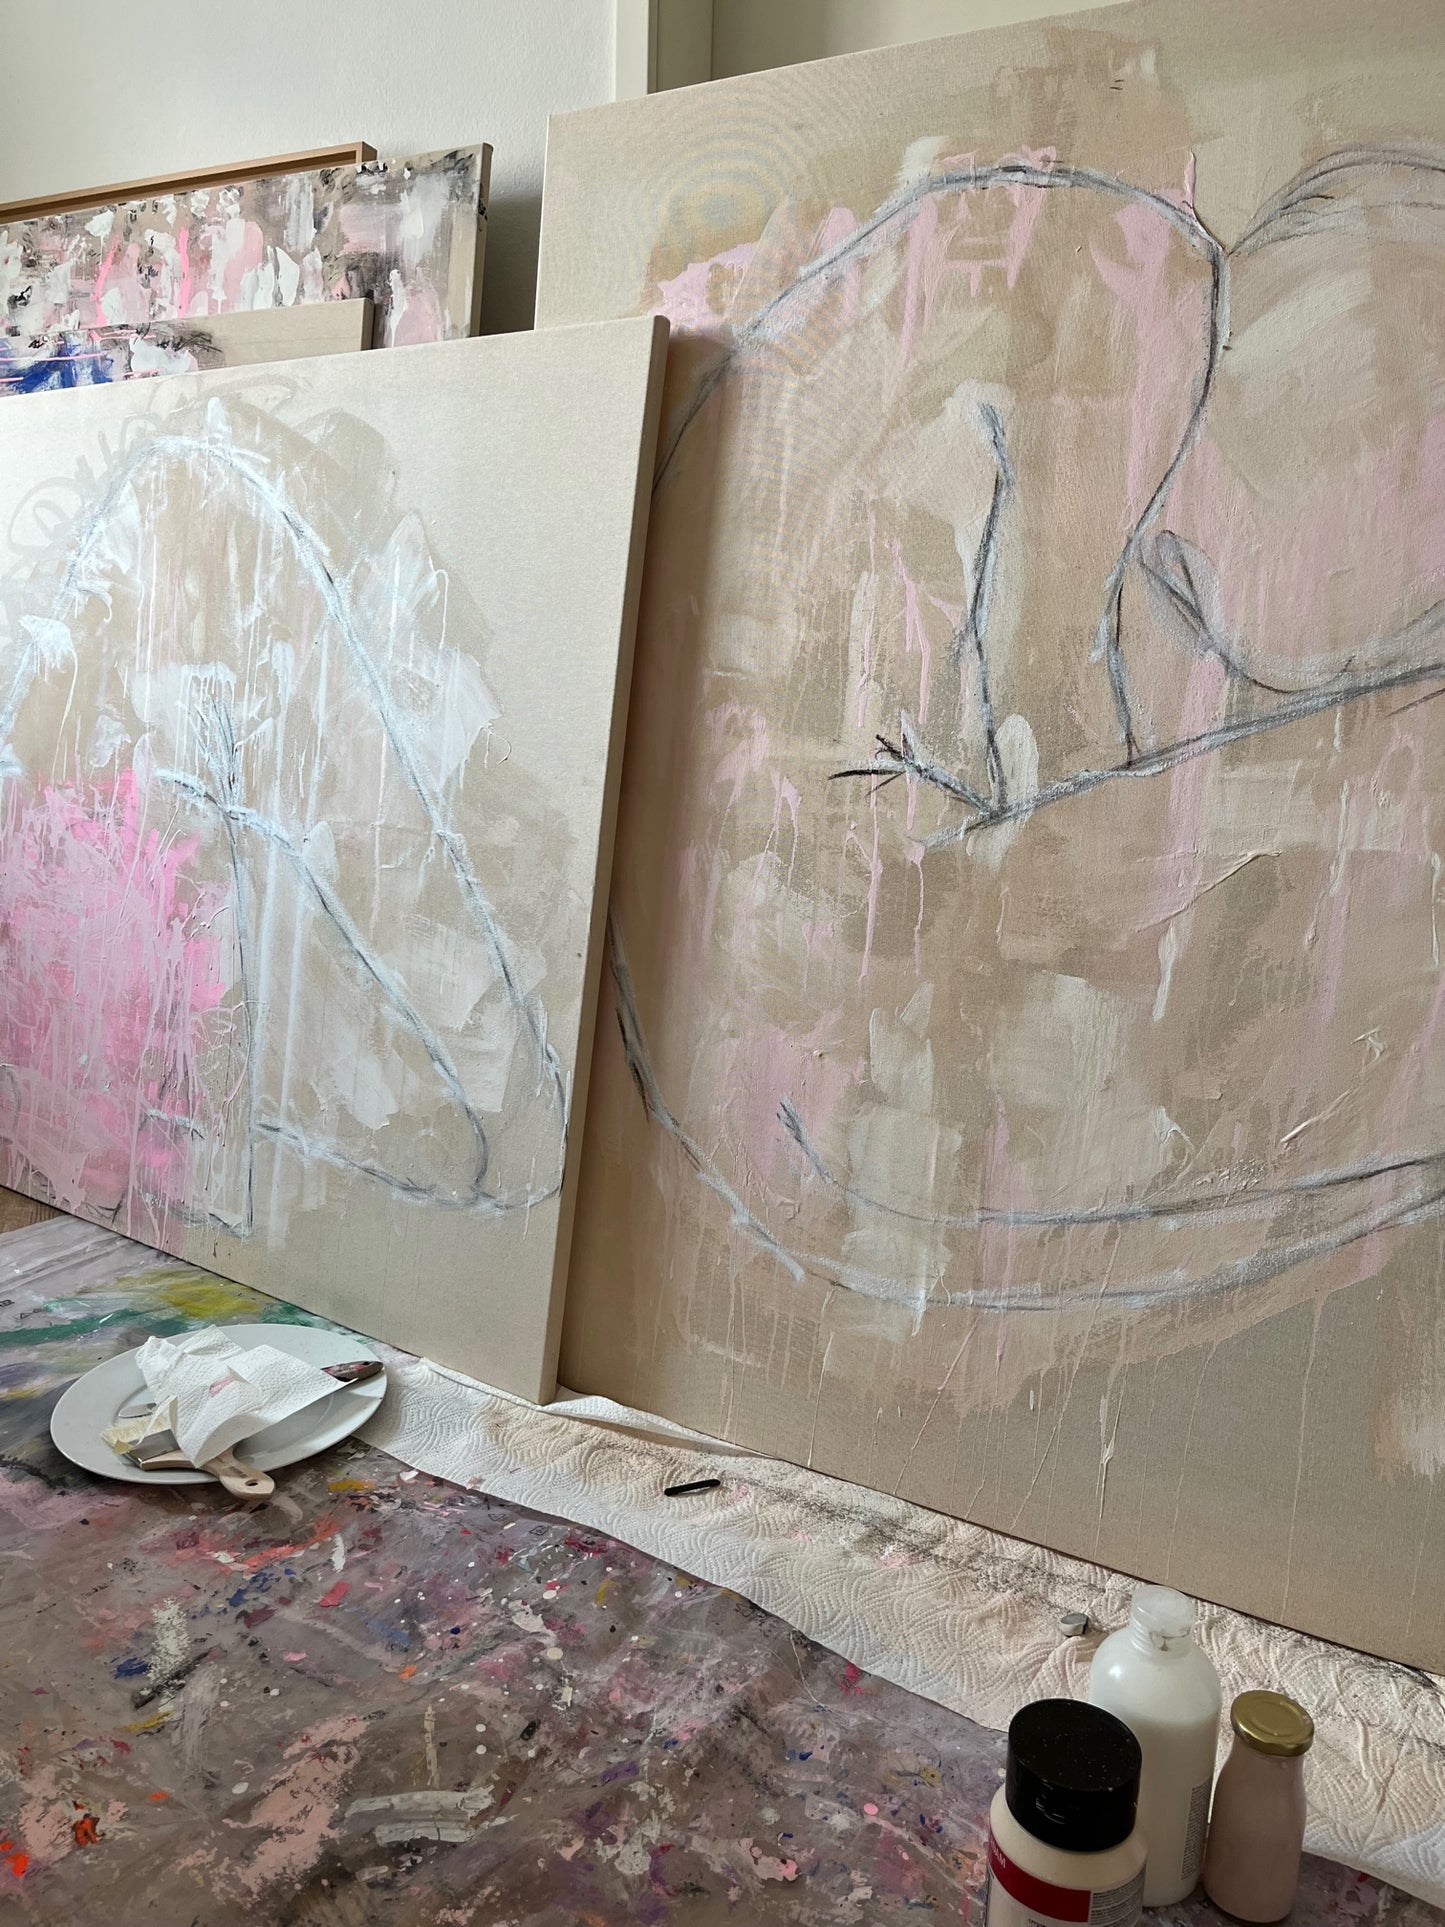 "Abstraction, Figuration and Emotion" Painting Workshop with visual artist Katja in Munich, Germany